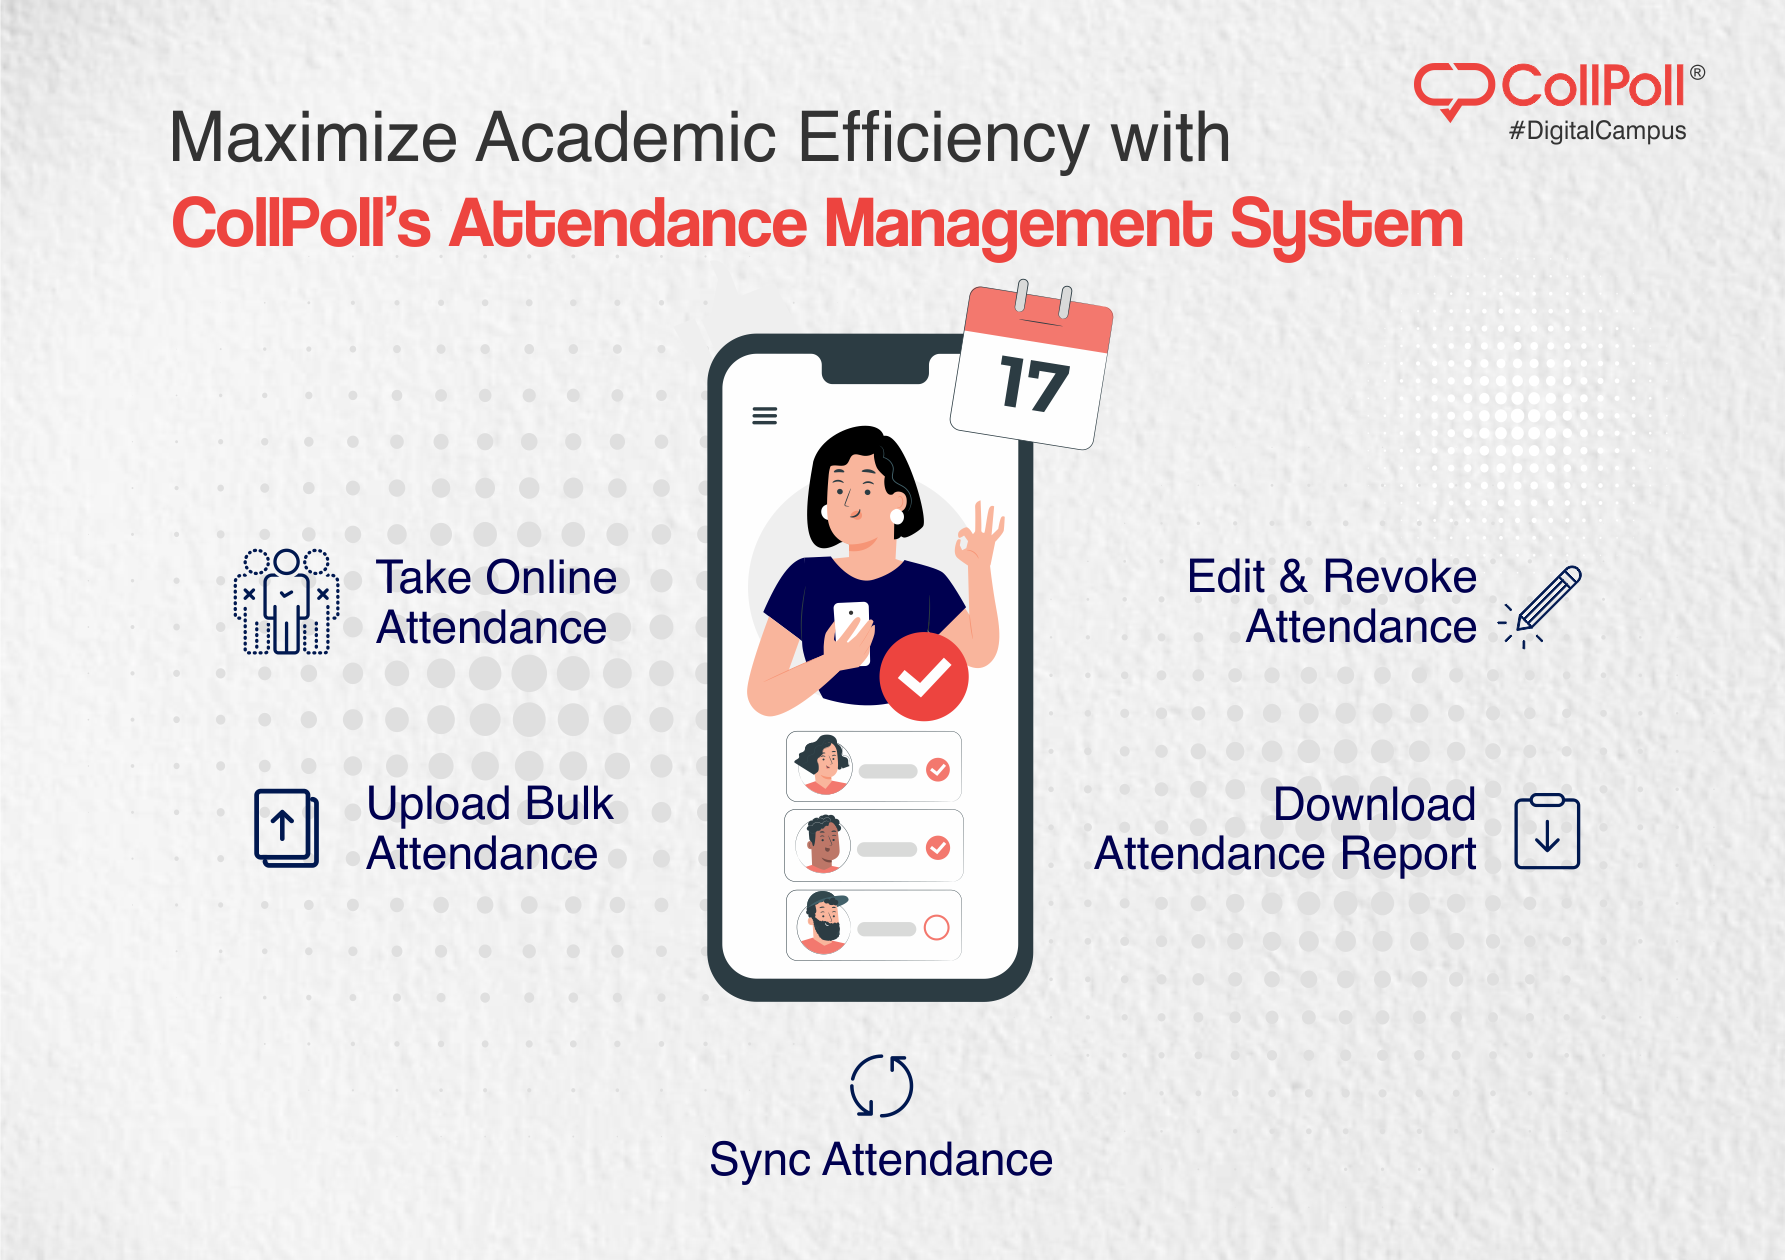 Manage Attendance Records with CollPoll's LMS